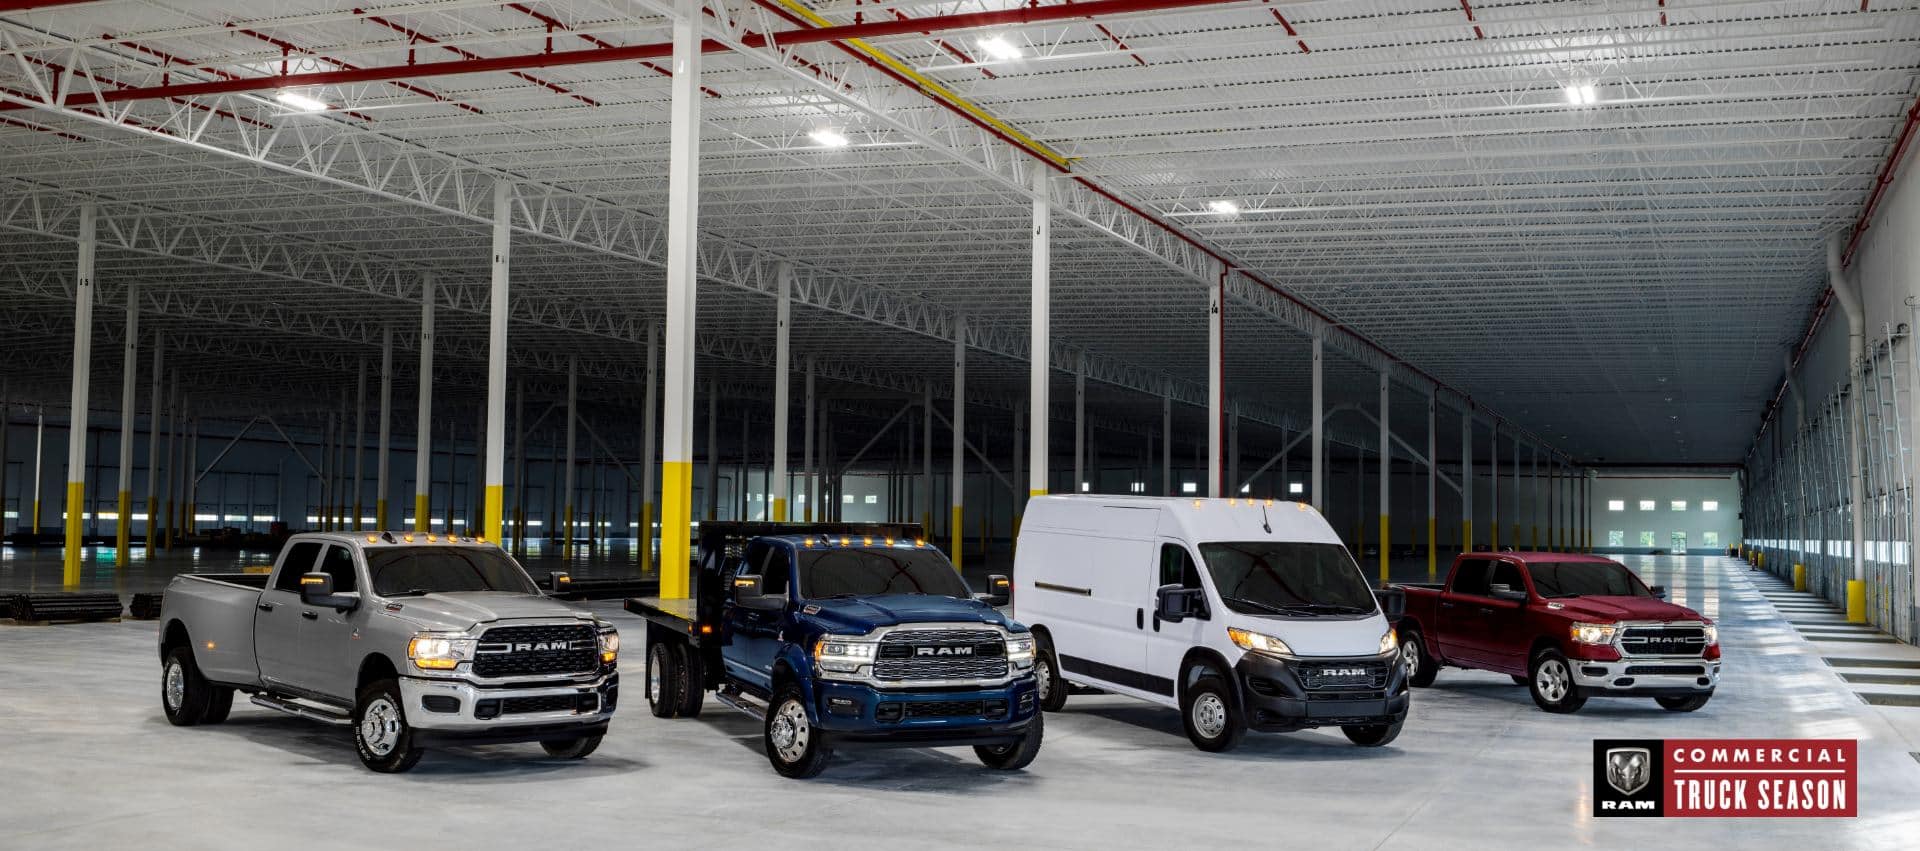 A lineup of four Ram Brand vehicles parked in an industrial garage. From left to right: a silver 2024 Ram 3500 Big Horn 4x4 Crew Cab, a blue 2024 Ram 4500 Limited Chassis Crew Cab with utility bed upfit, a white 2024 Ram ProMaster 2500 Tradesman 159" WB High Roof Cargo Van and a red 2024 Ram 1500 Tradesman 4x4 Crew Cab. Ram Commercial Truck Season.